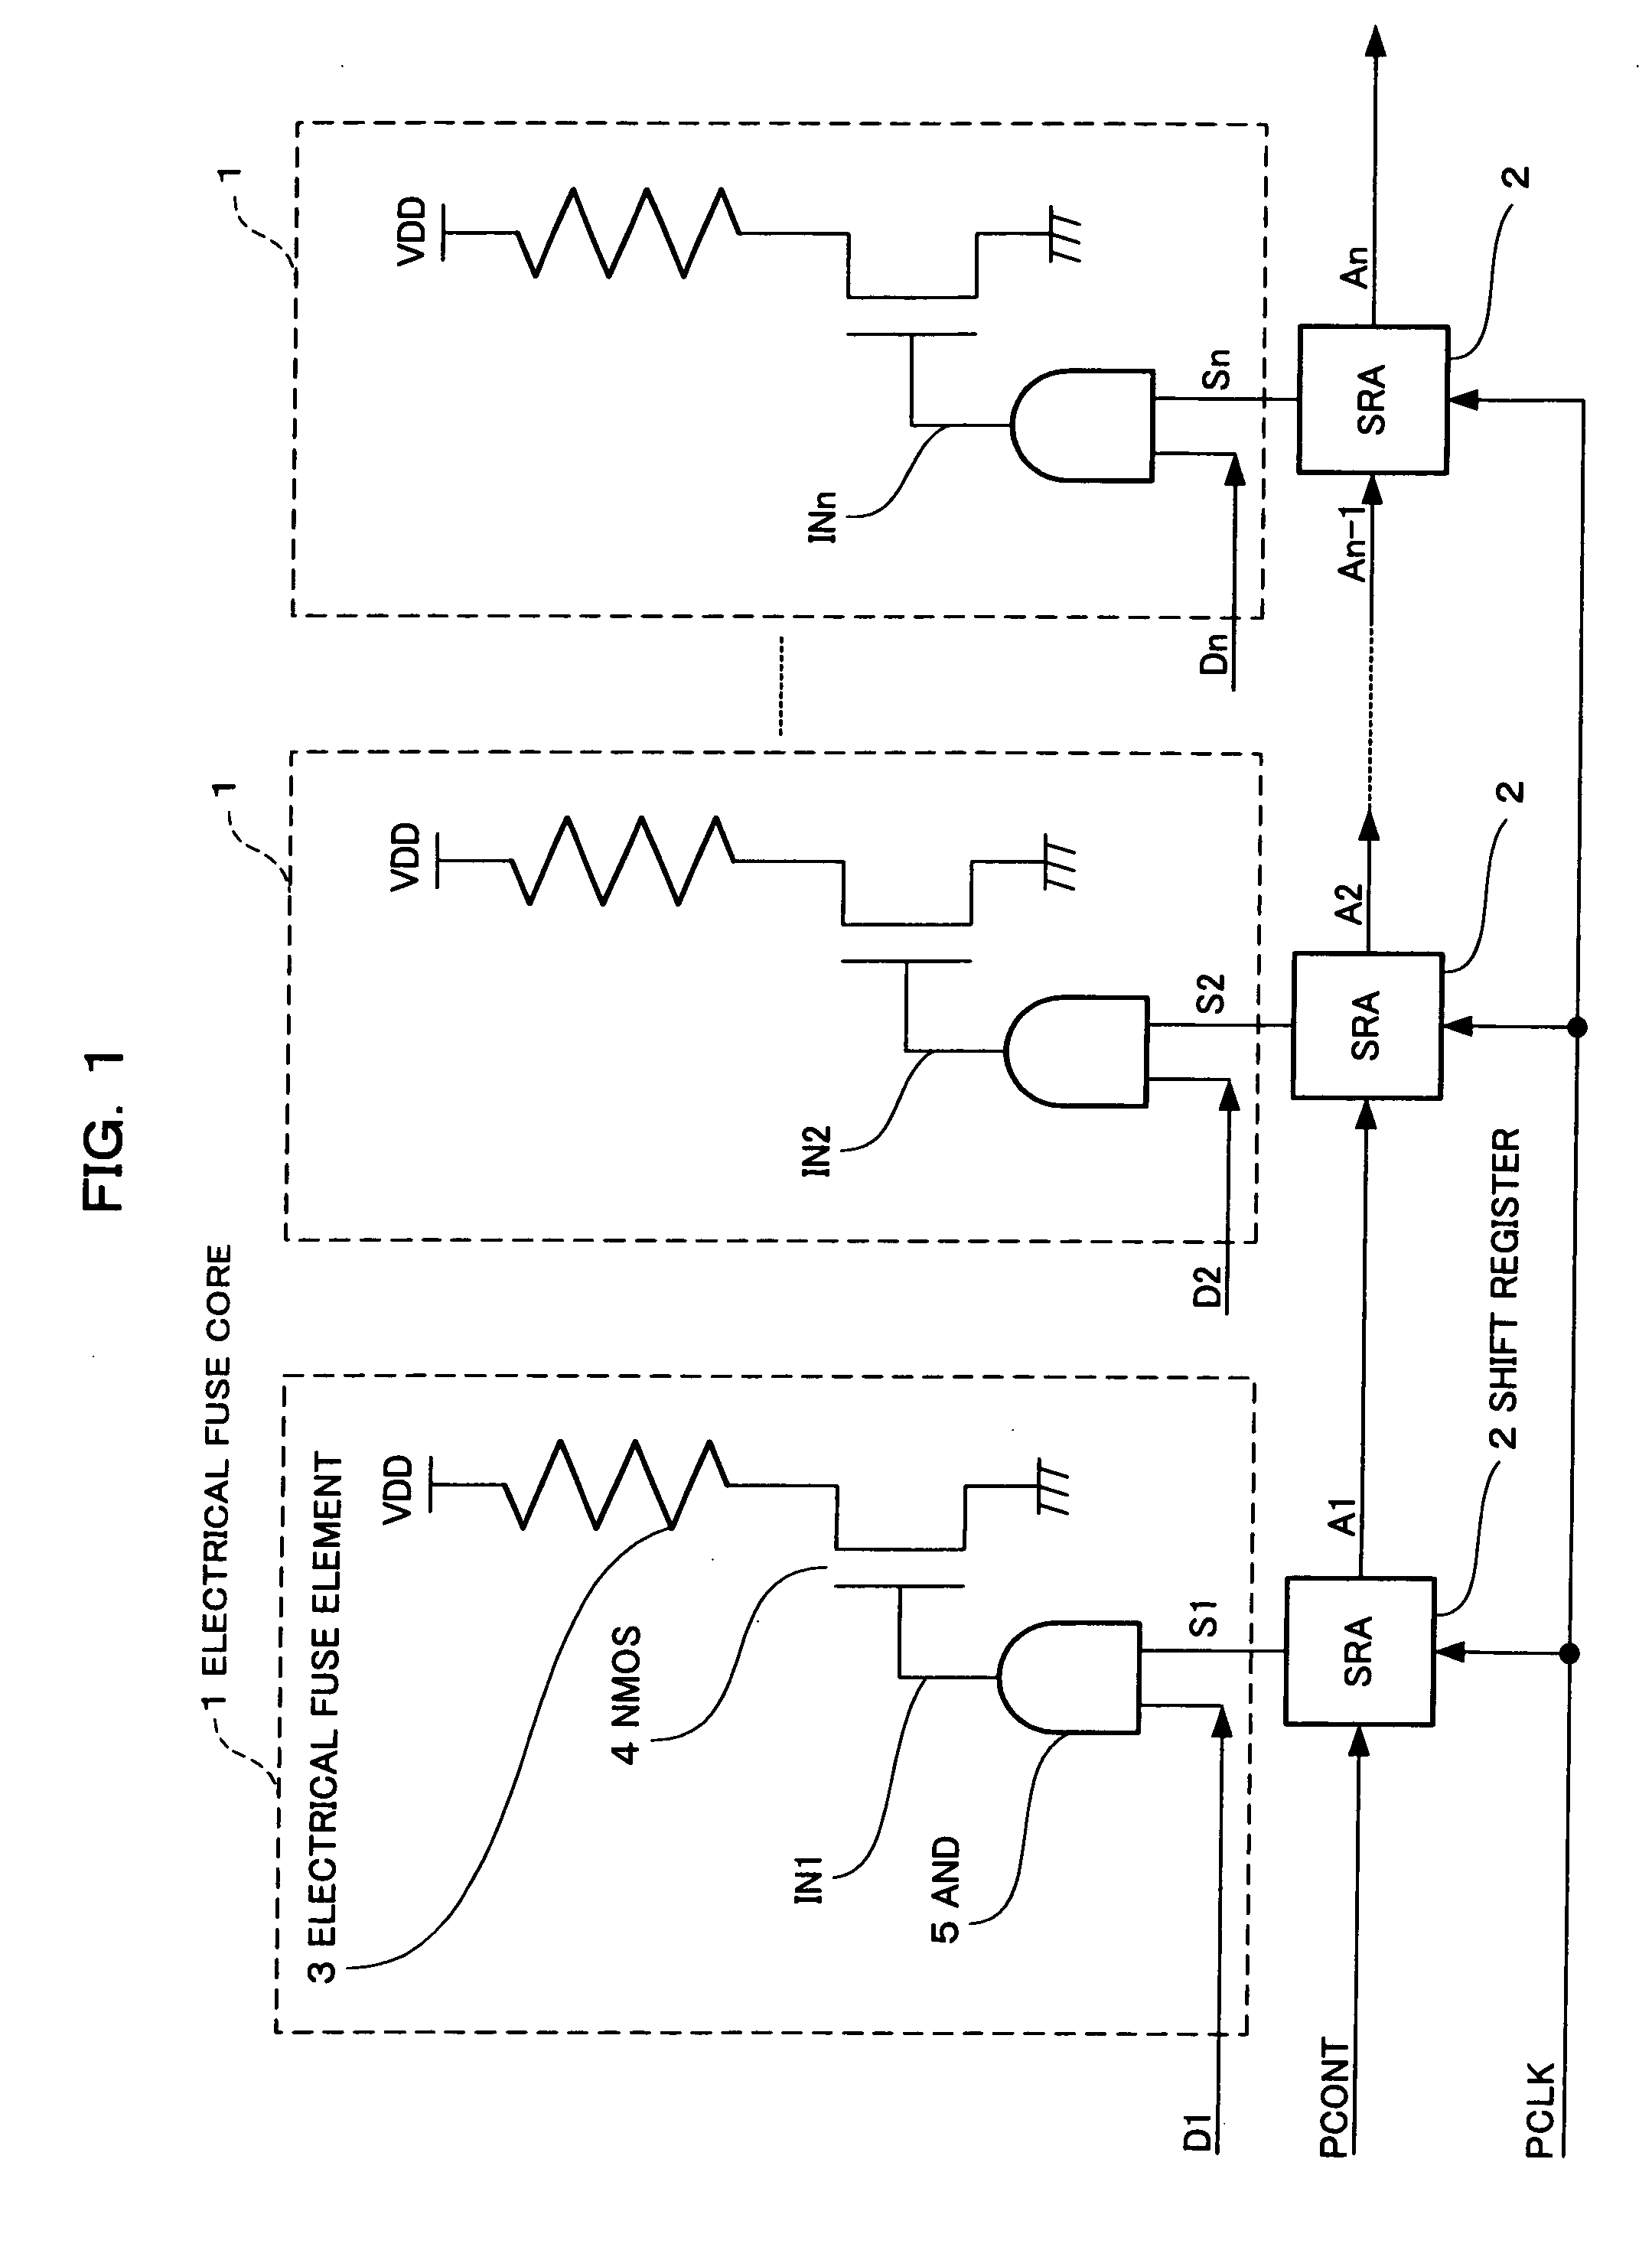 Electrical fuse circuit